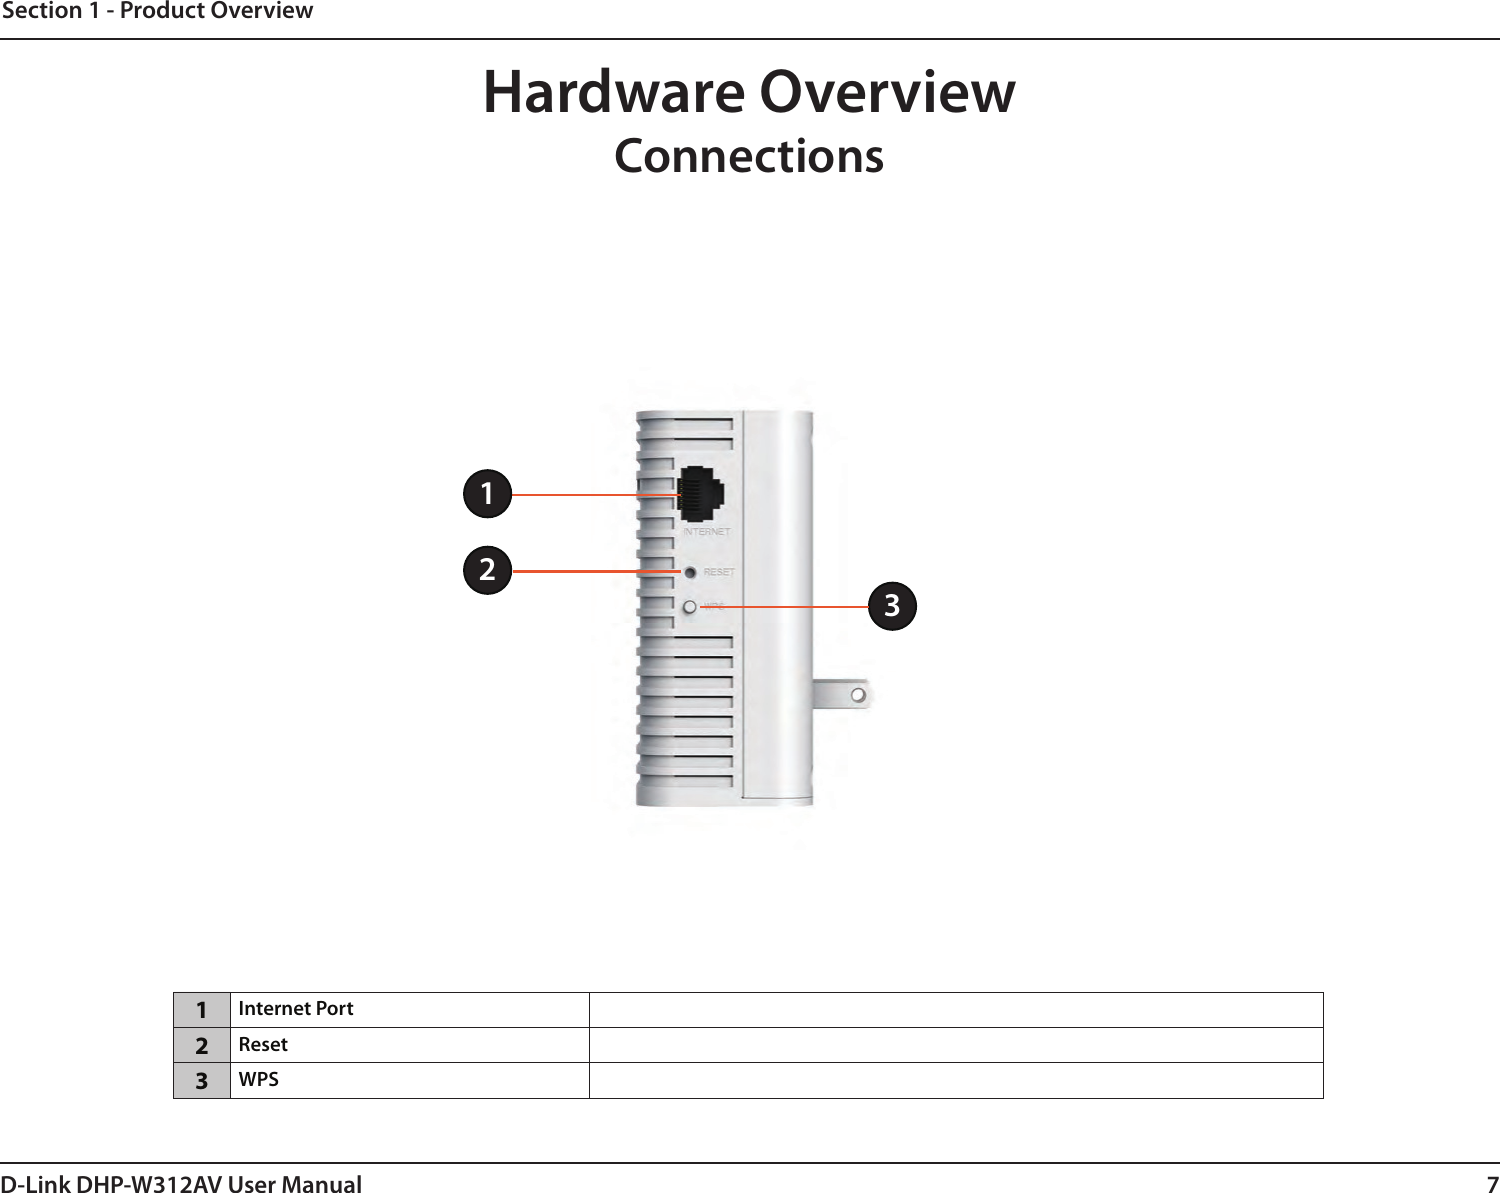 7D-Link DHP-W312AV User ManualSection 1 - Product OverviewHardware OverviewConnections1Internet Port2Reset3WPS1231